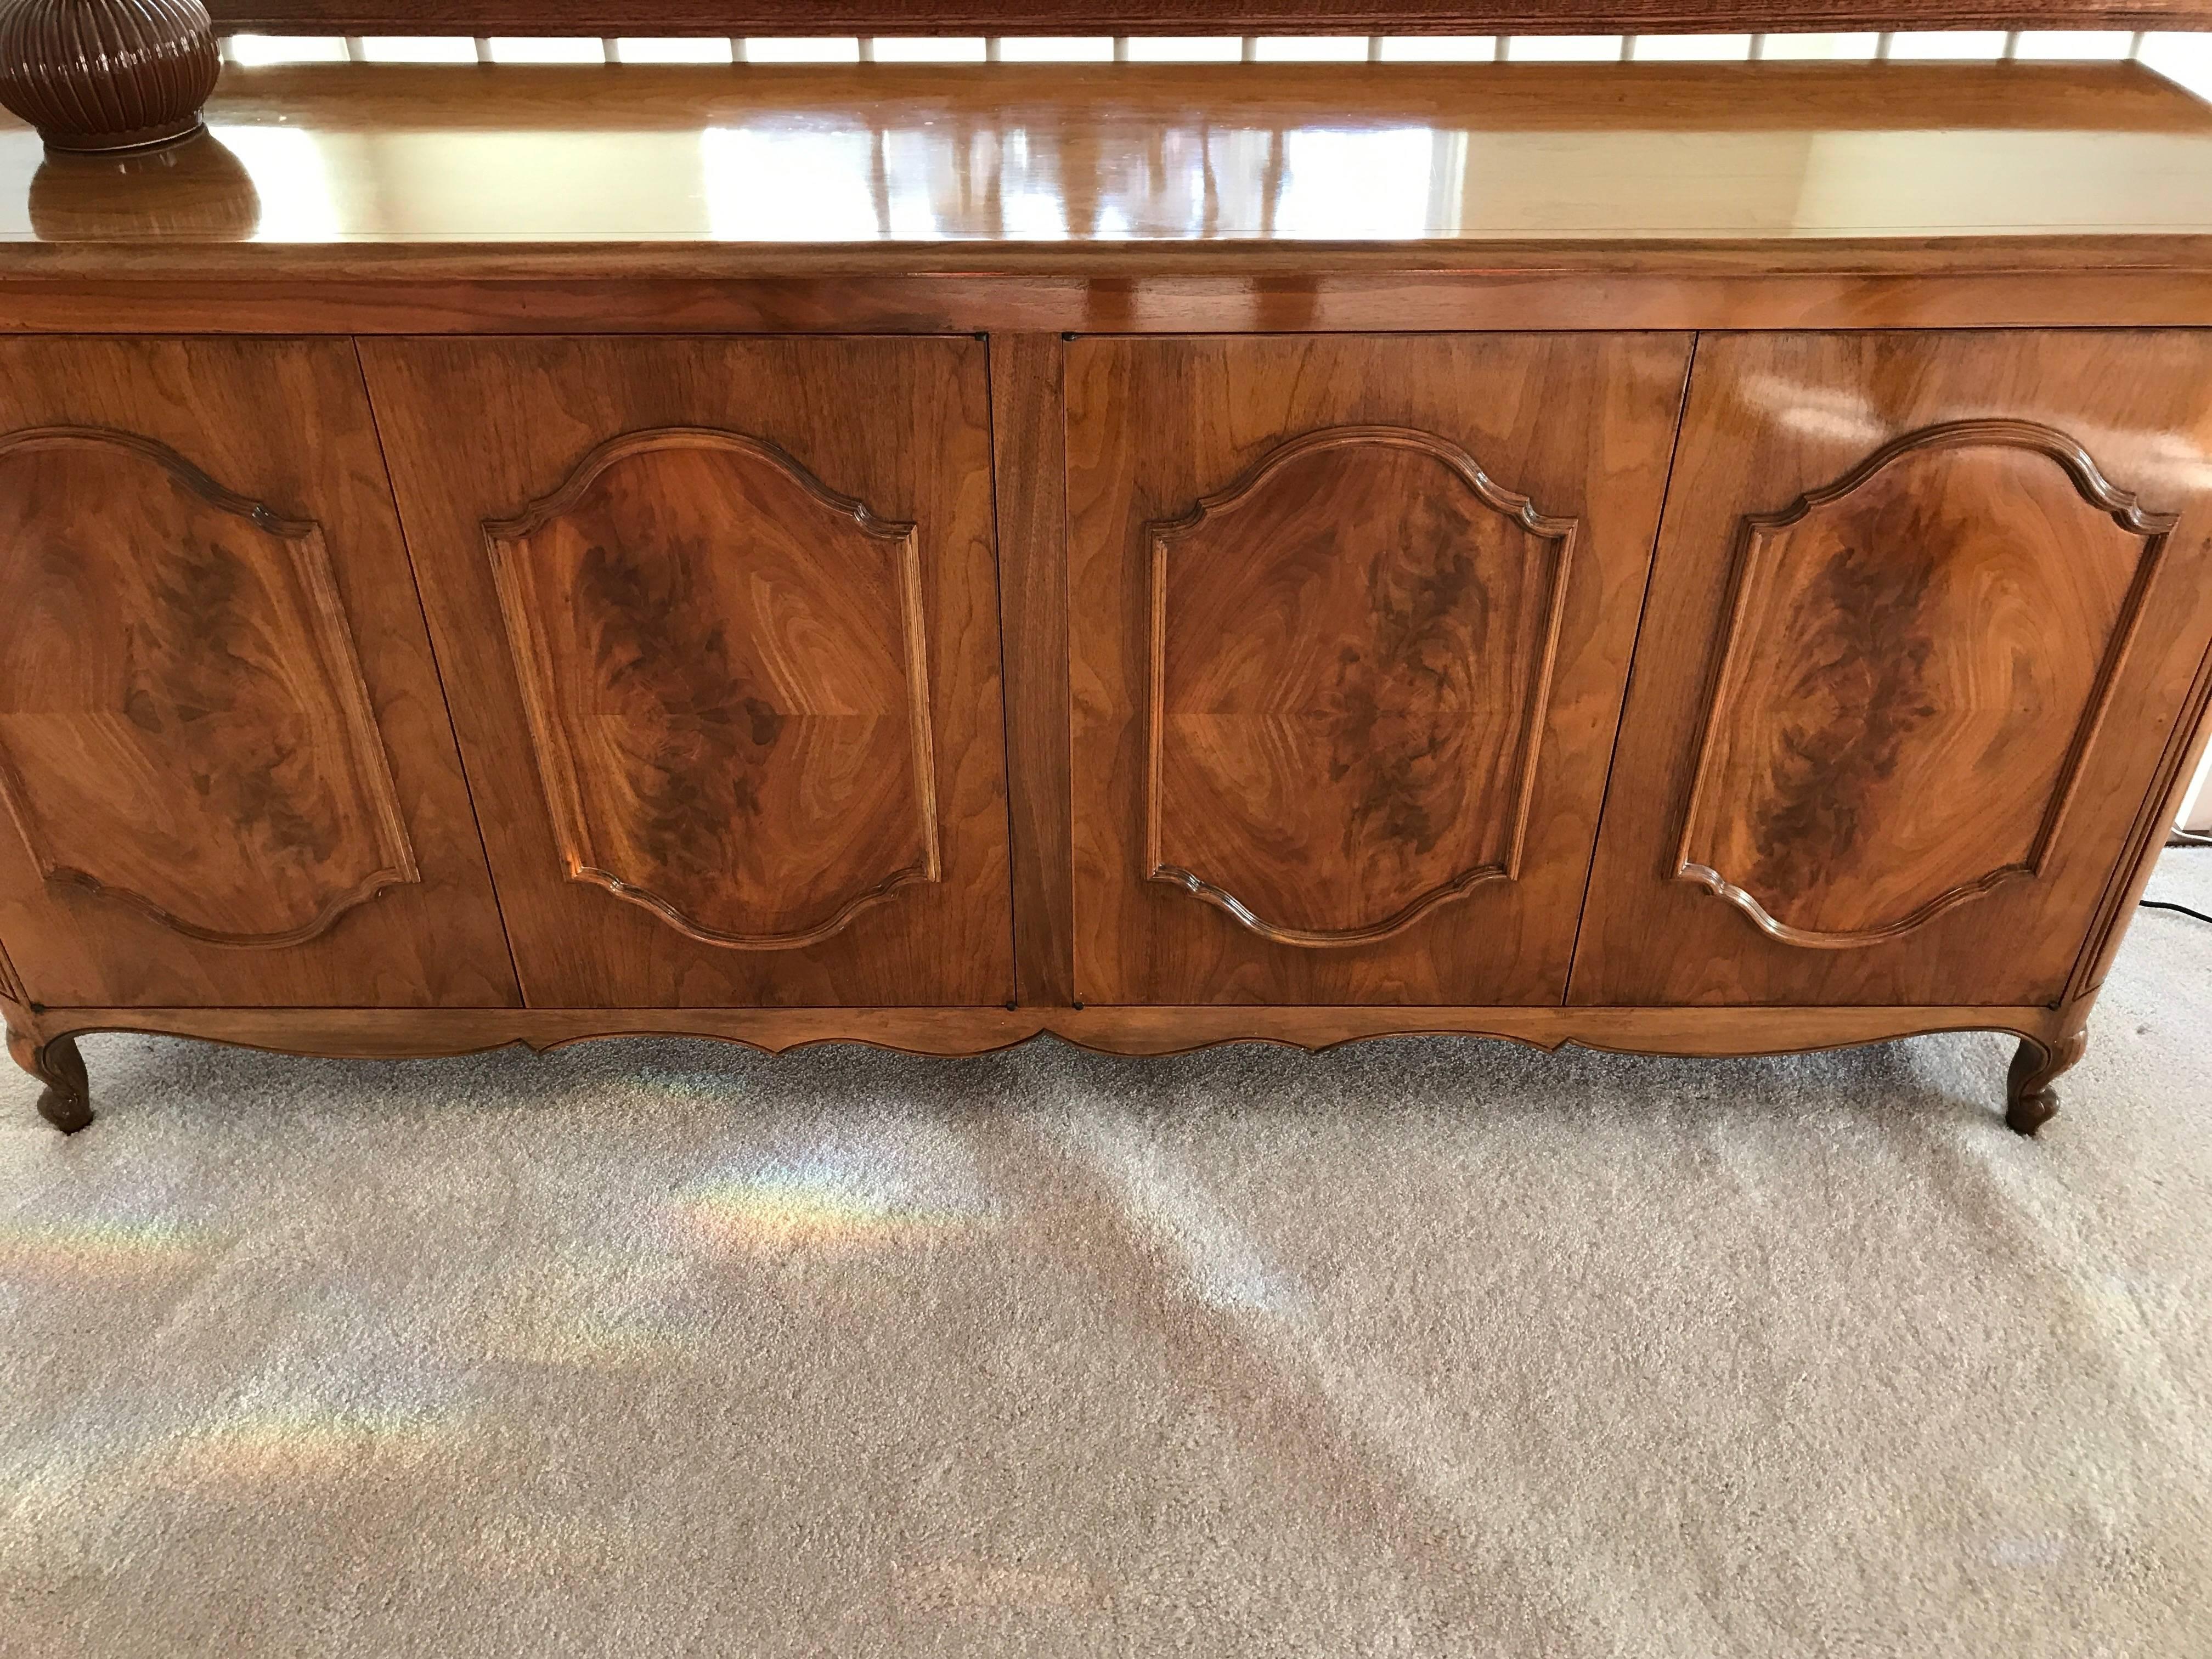 Very elegant solid walnut and satinwood sideboard with lively beautiful grain, and lots of storage inside.